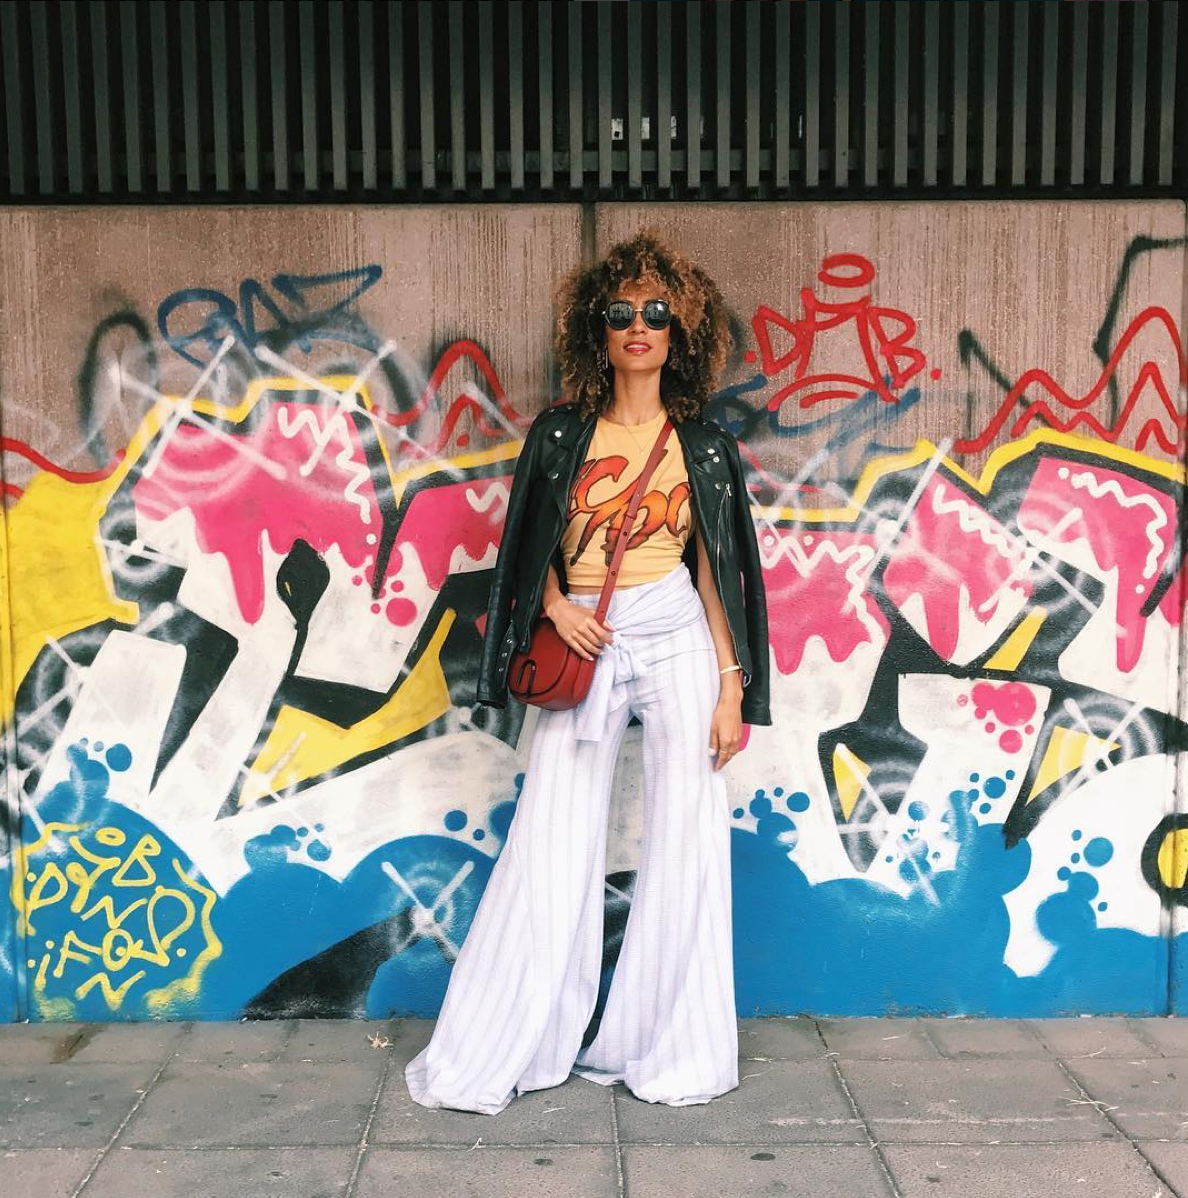 The Stylish Women Who Took Instagram by Storm in 2016
